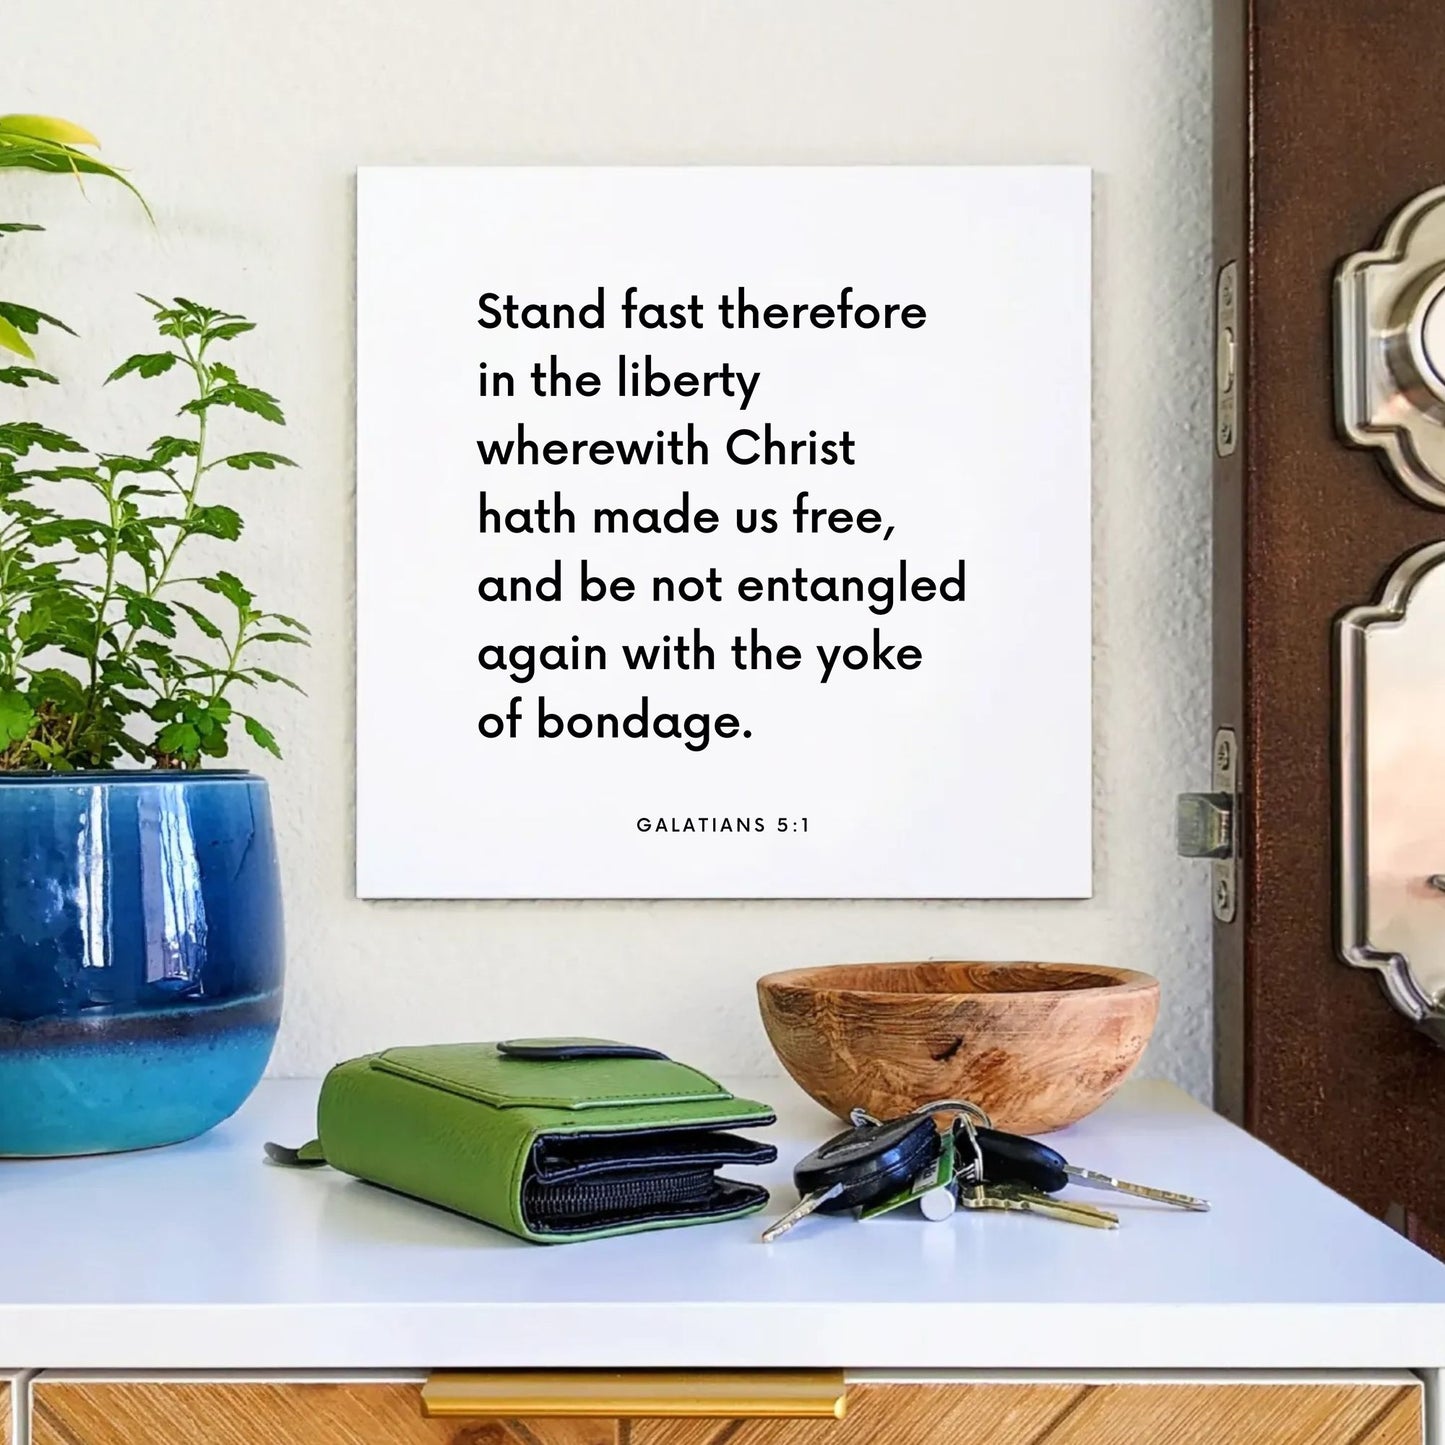 Entryway mouting of the scripture tile for Galatians 5:1 - "Stand fast in the liberty wherewith Christ hath made us free"